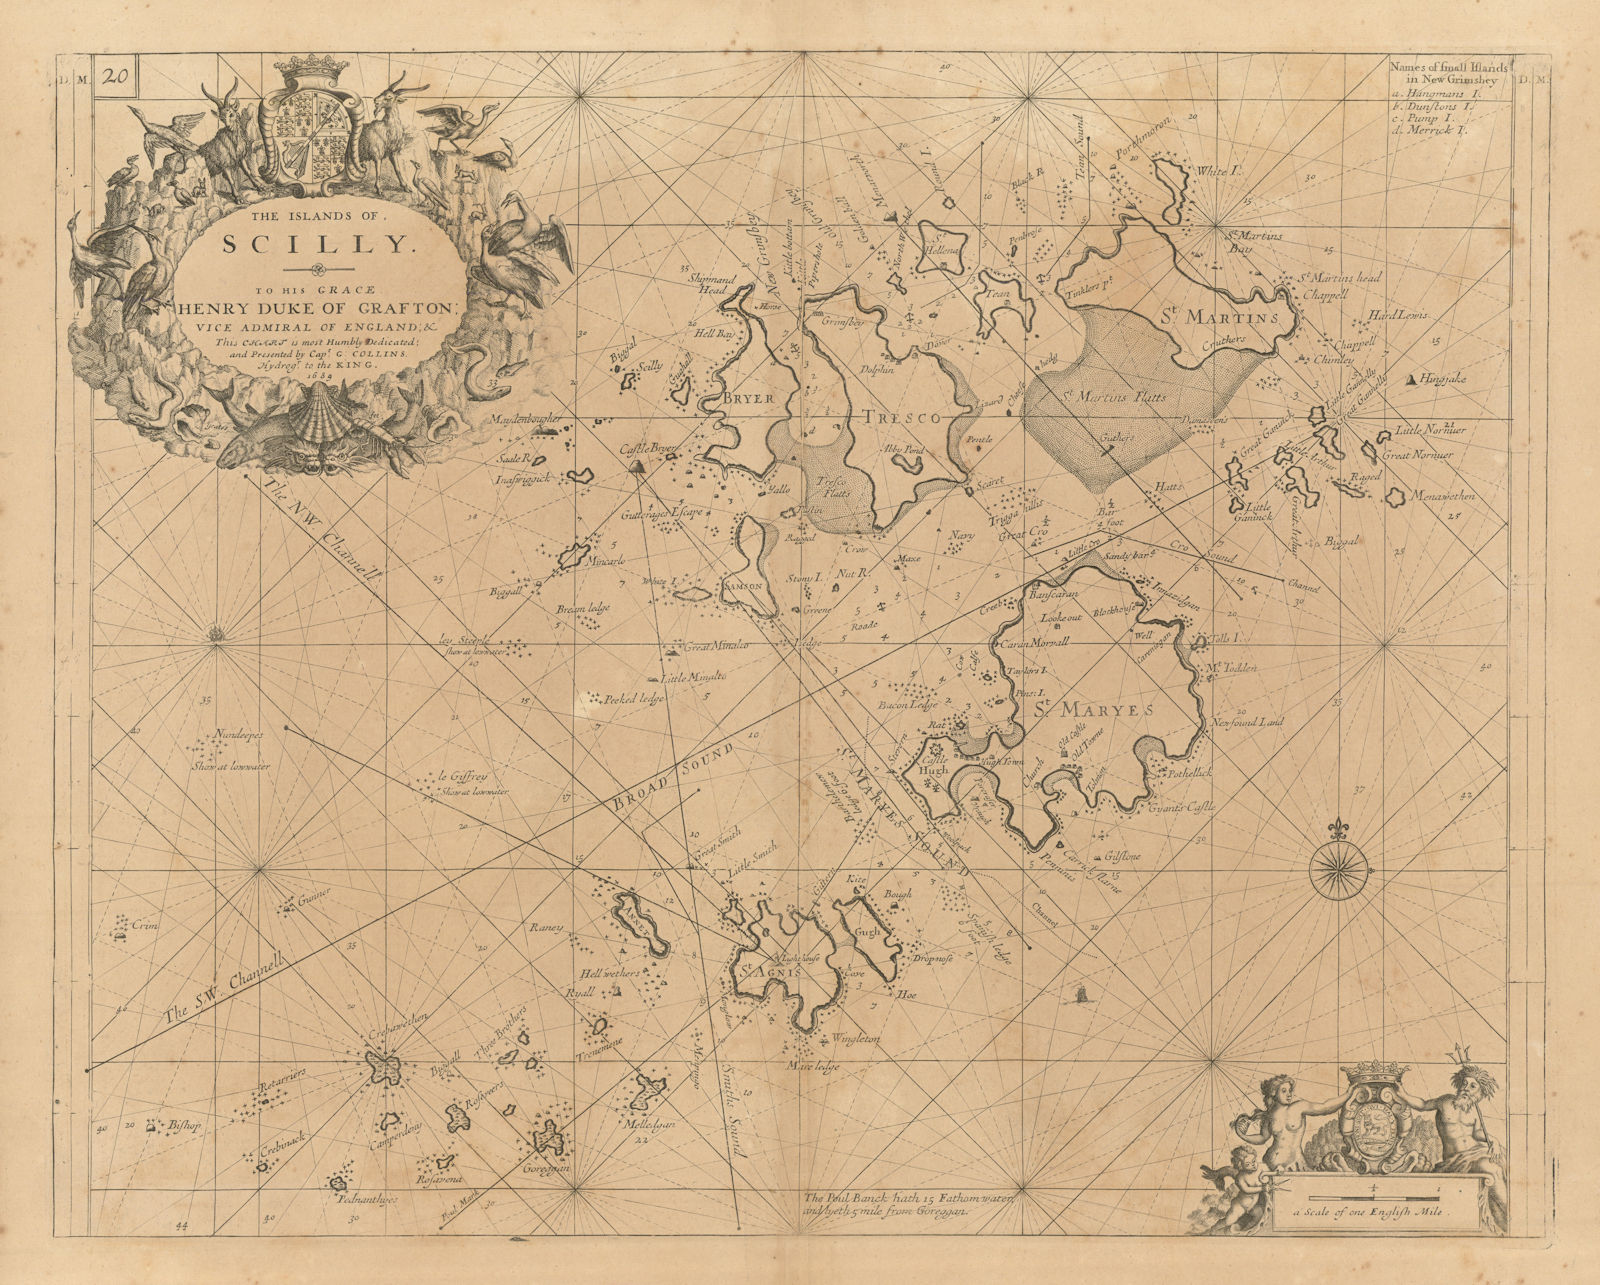 THE ISLANDS OF SCILLY sea chart by Captain Greenvile. COLLINS 1693 old map